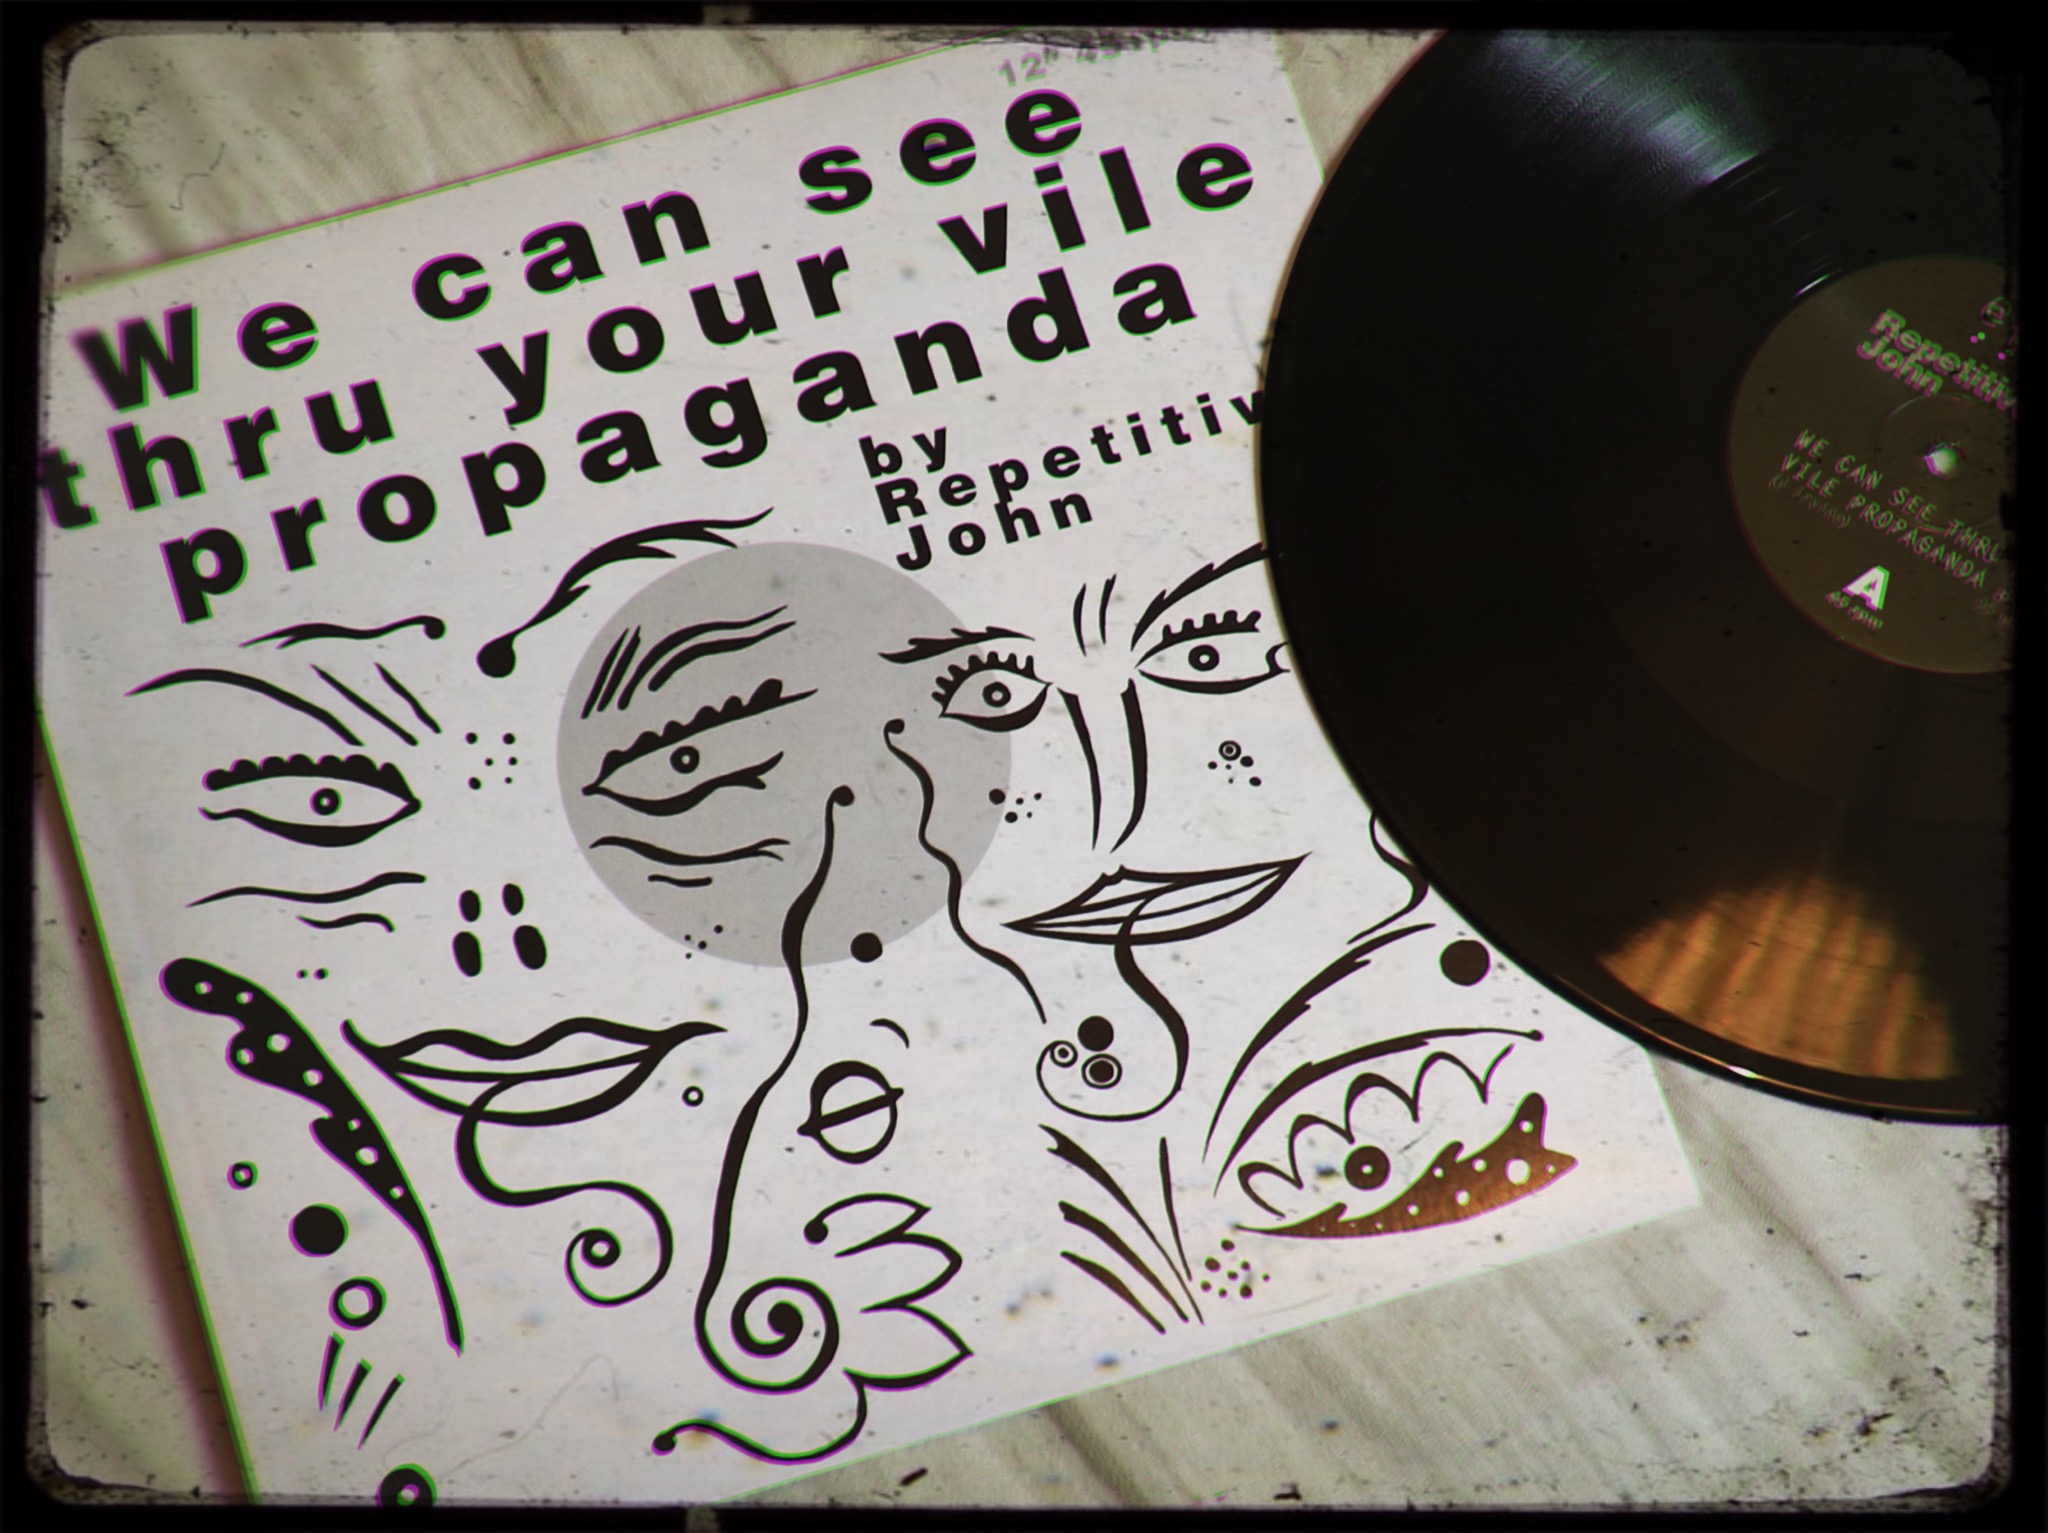 In May 2019 create and release a 12″ vinyl cultural artefact in the shape of ‘We Can See Thru Your Vile Propaganda’ by Repetitive Jo